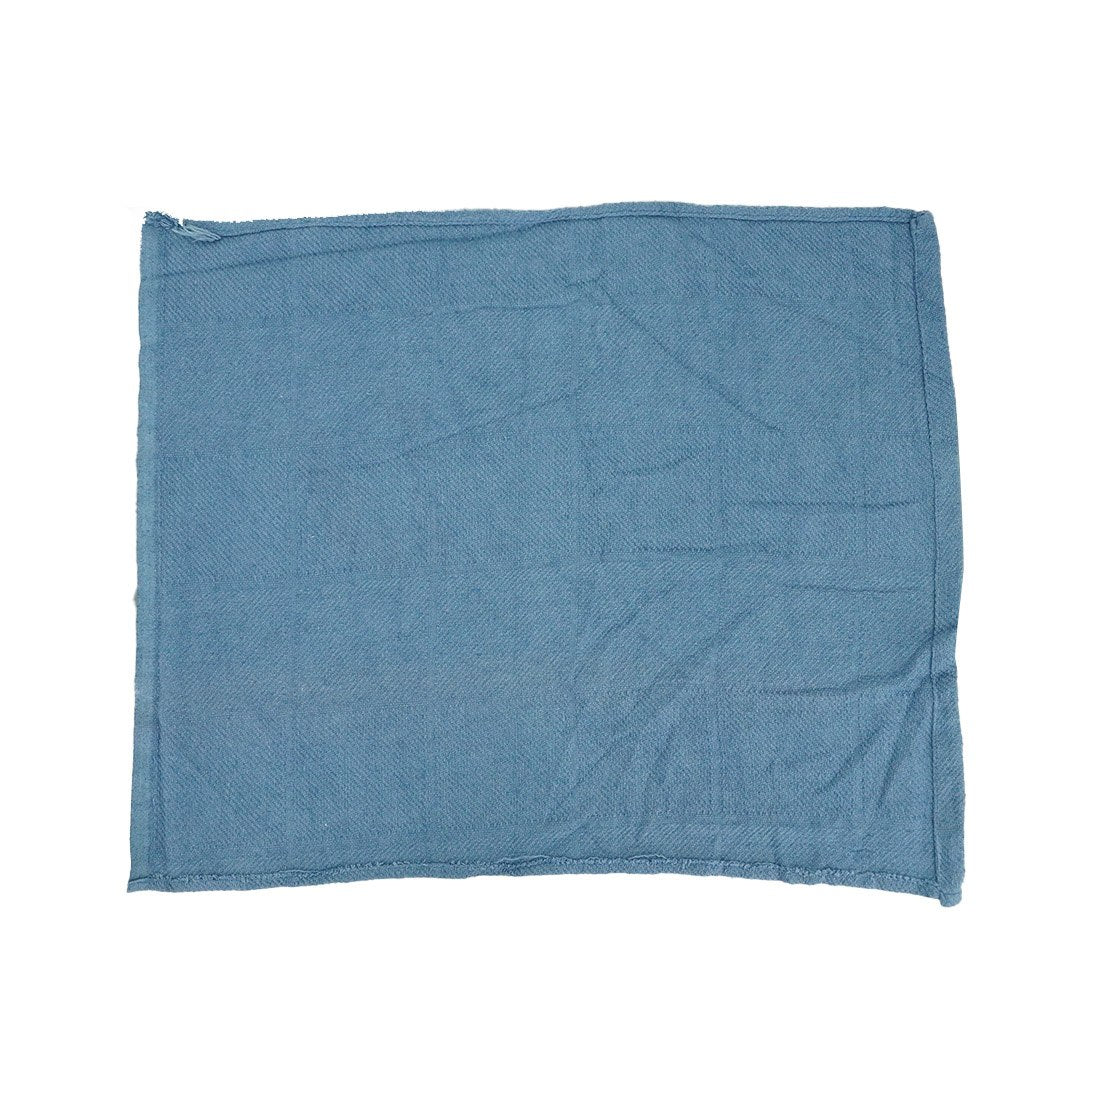 Recycled Surgical Towels Mixed Flat View